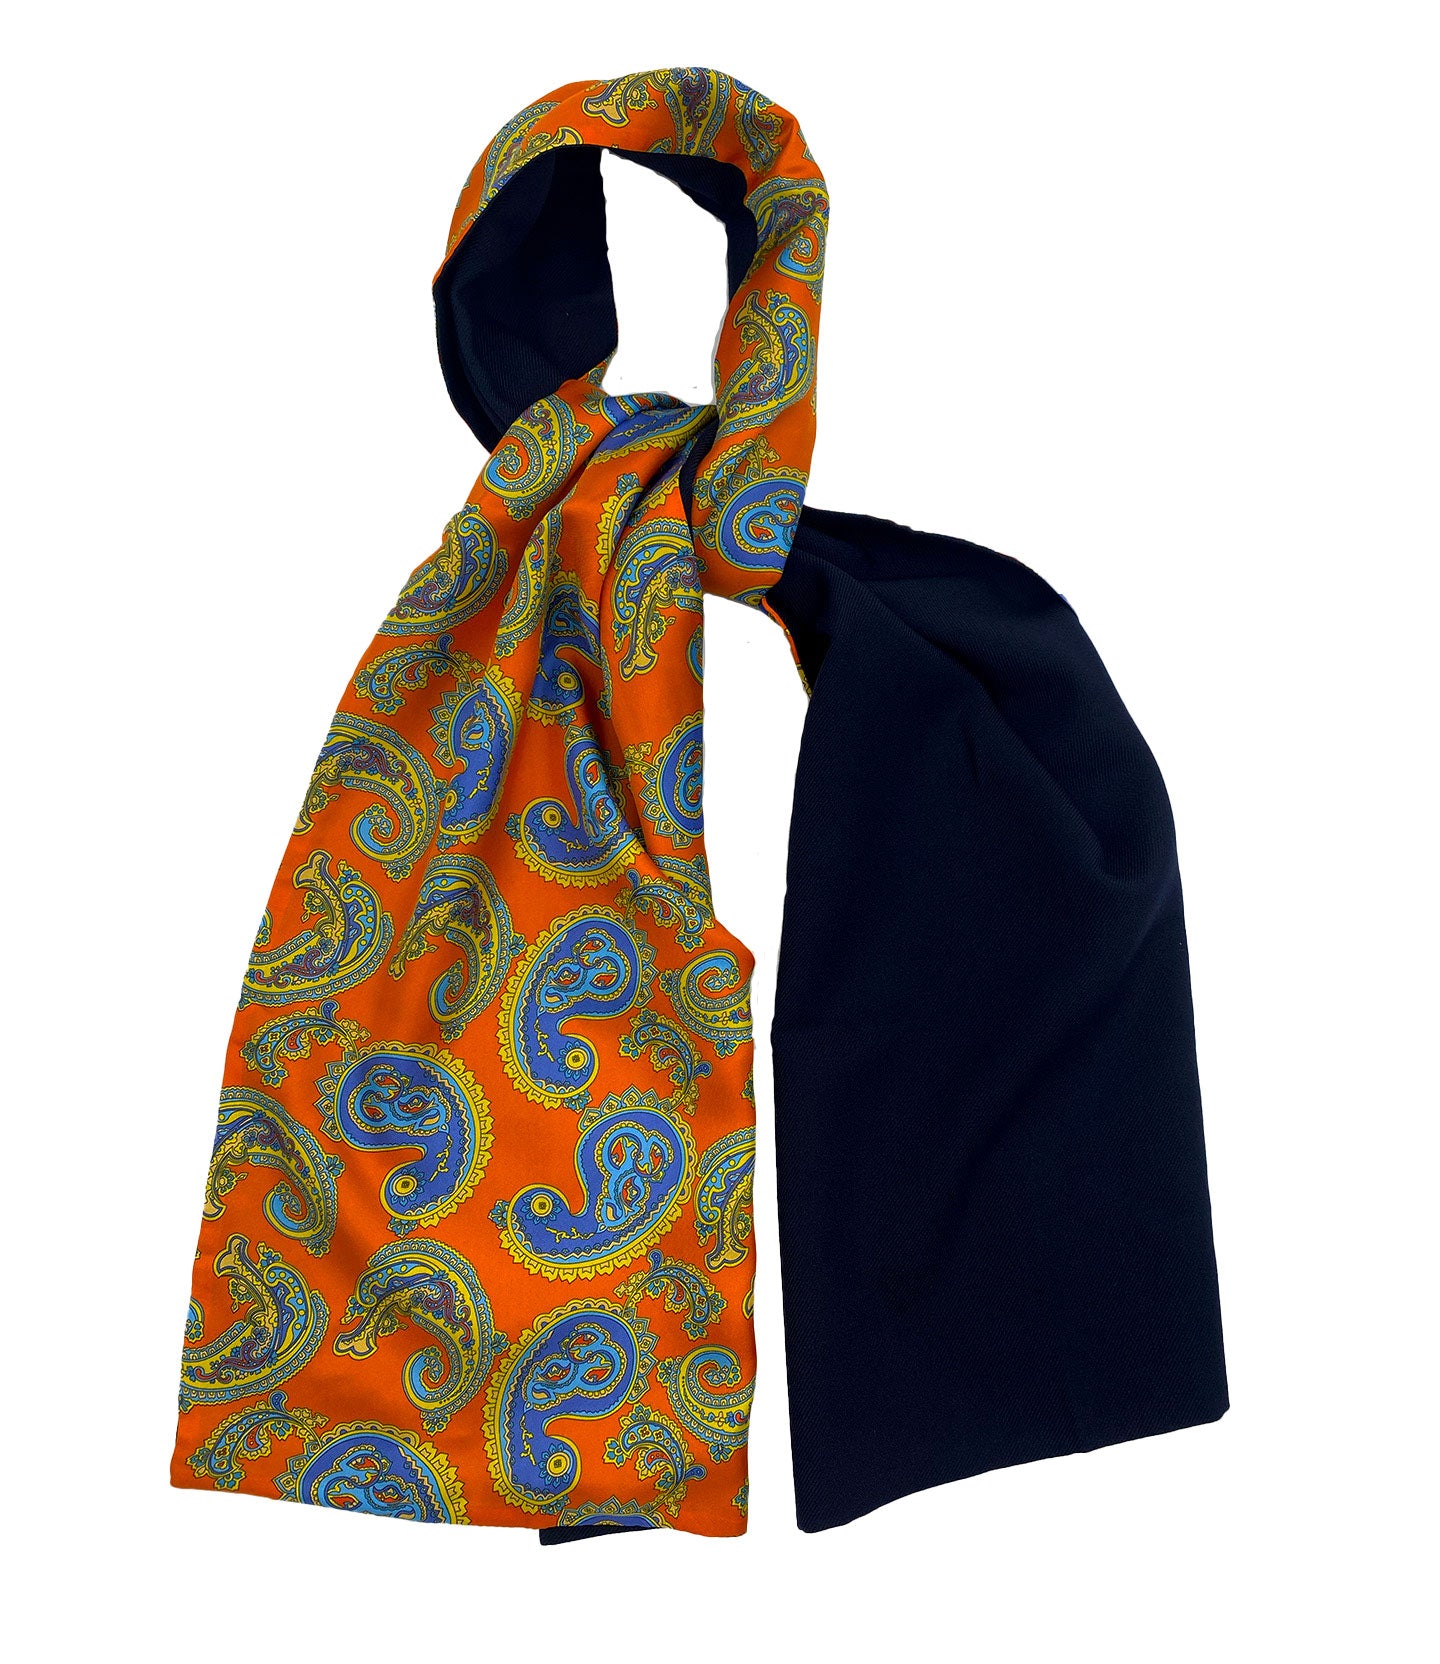 The 'Orange' wool-backed silk wide scarf unravelled and looped in the middle, demonstrating the length, width, pattern on silk and the fine woollen underside.